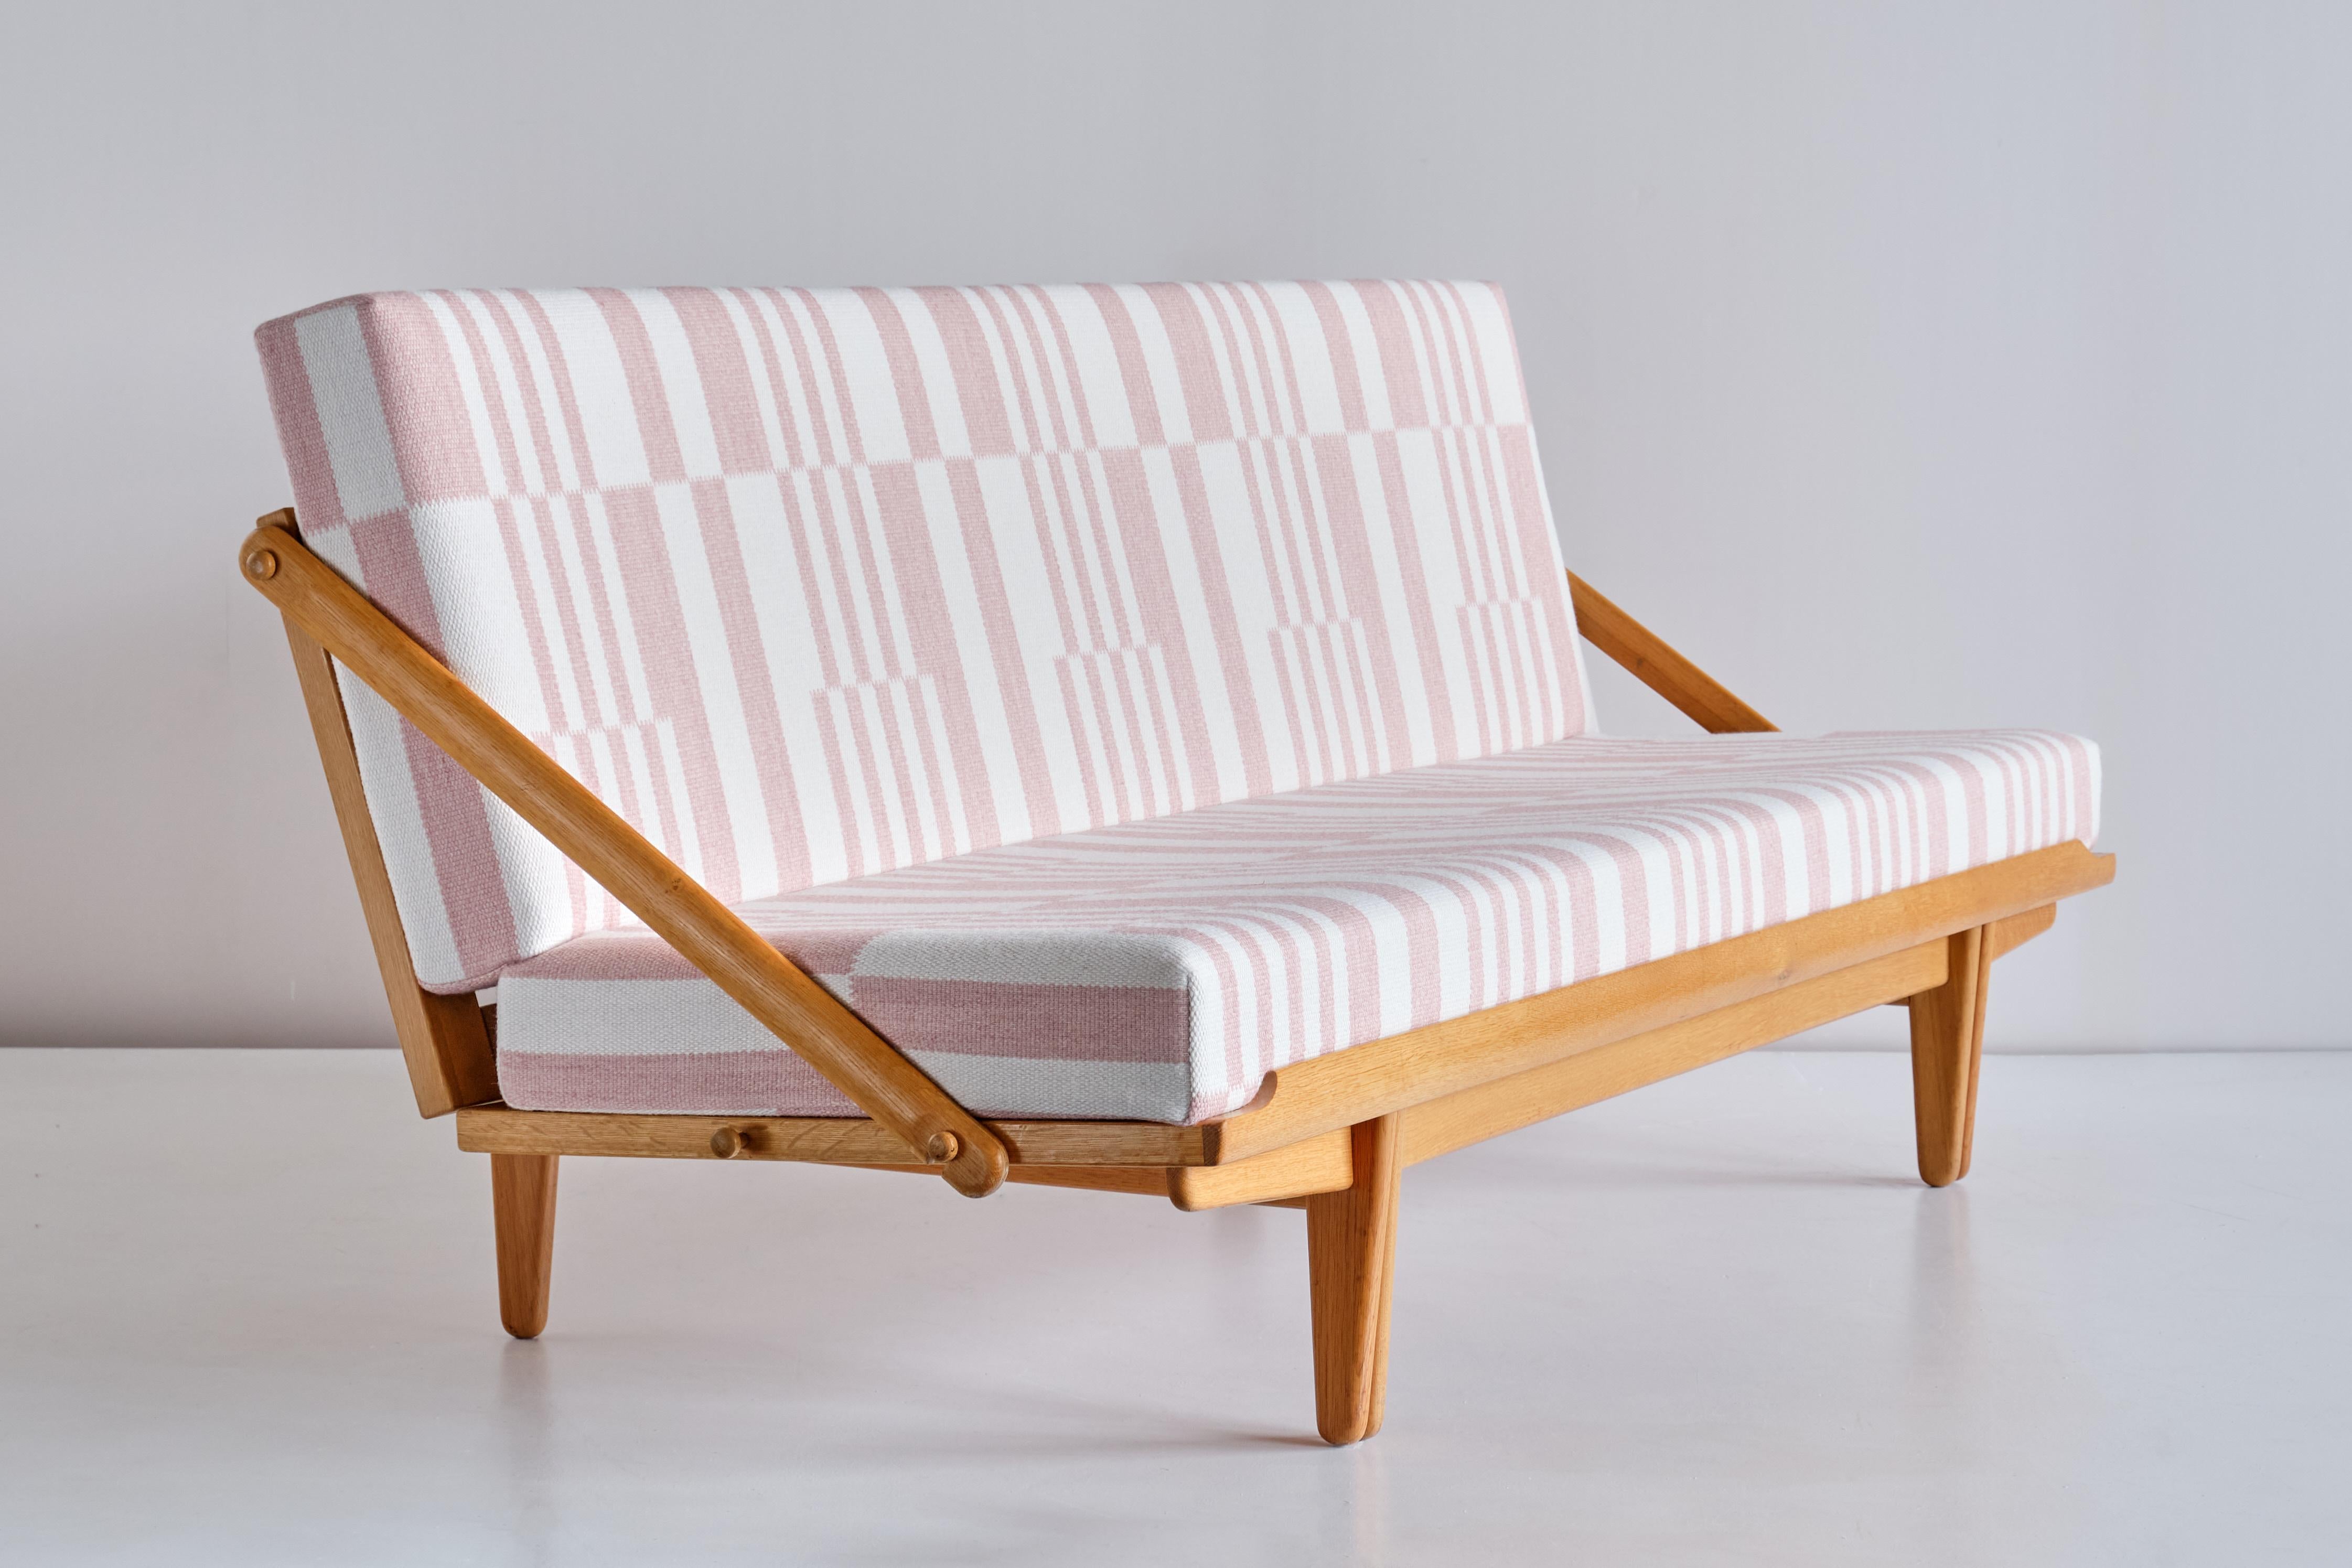 Mid-20th Century Poul Volther Sofa / Daybed in Oak and Pierre Frey Fabric, Gemla, Sweden, 1955 For Sale